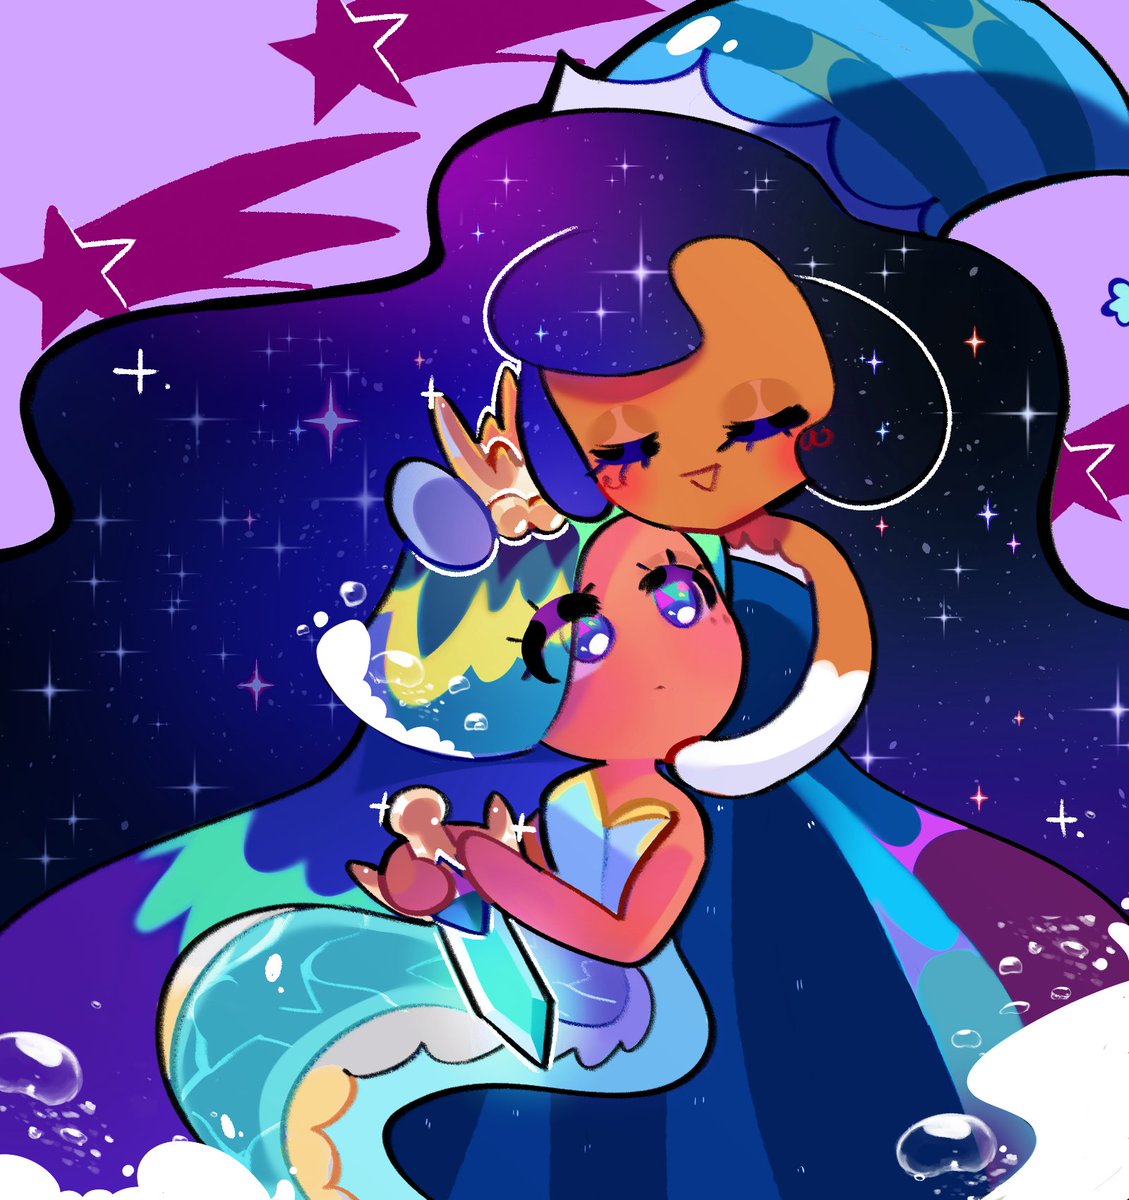 Moonlight and seamoon was like my first introduction to cookie run content ever so I'm glad moonie is getting added :,) #seamoon #moonlightcookie #cookierun #seafairycookie